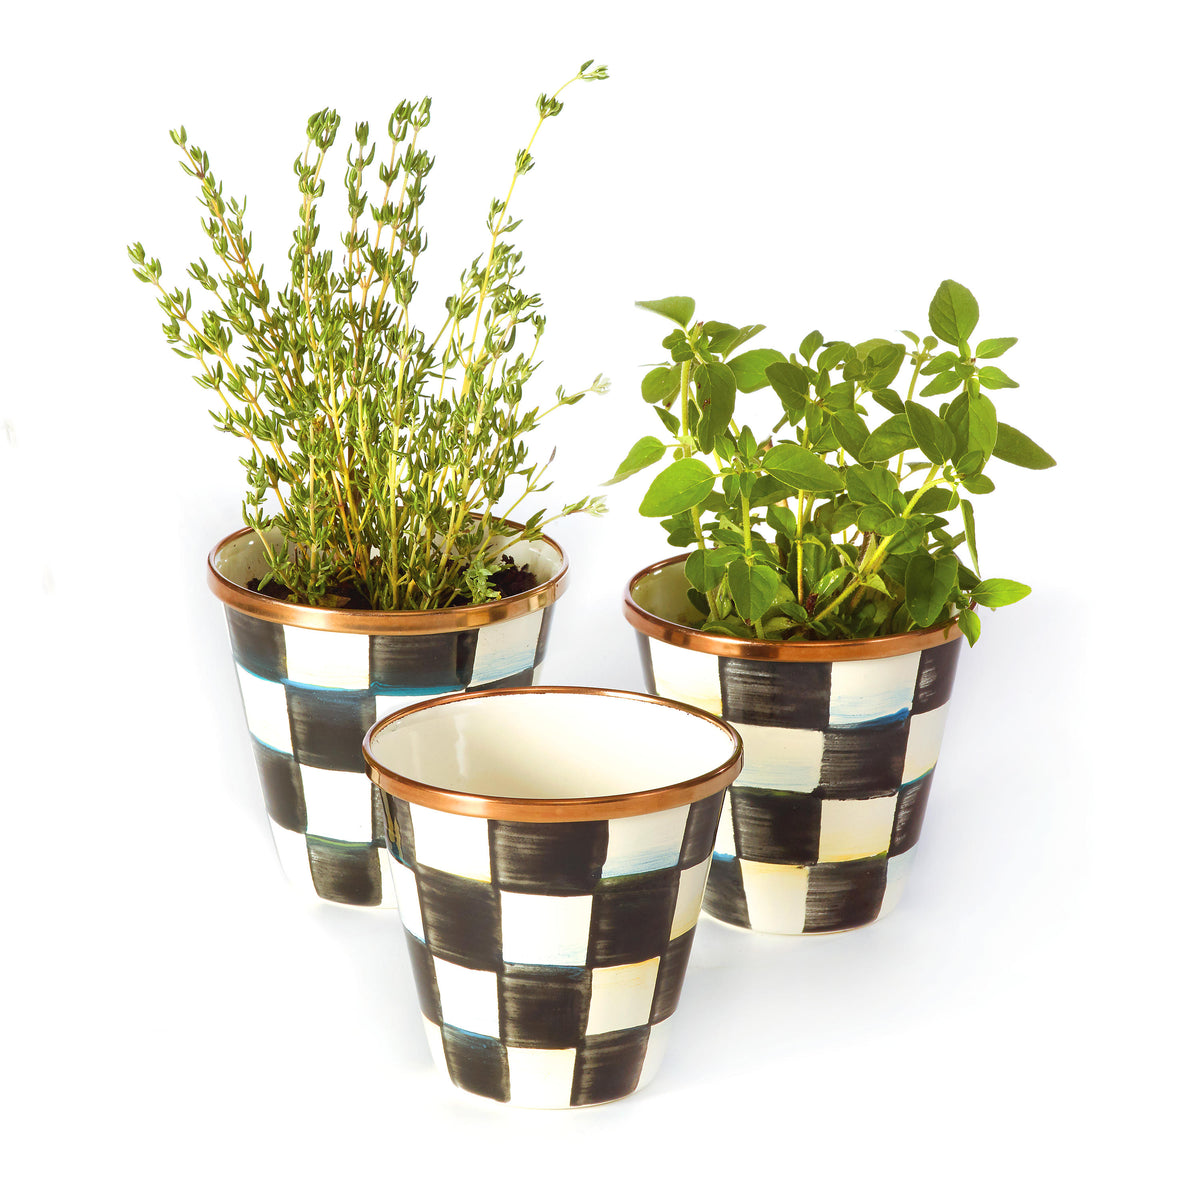 Courtly Check Enamel Herb Pots - Set of 3